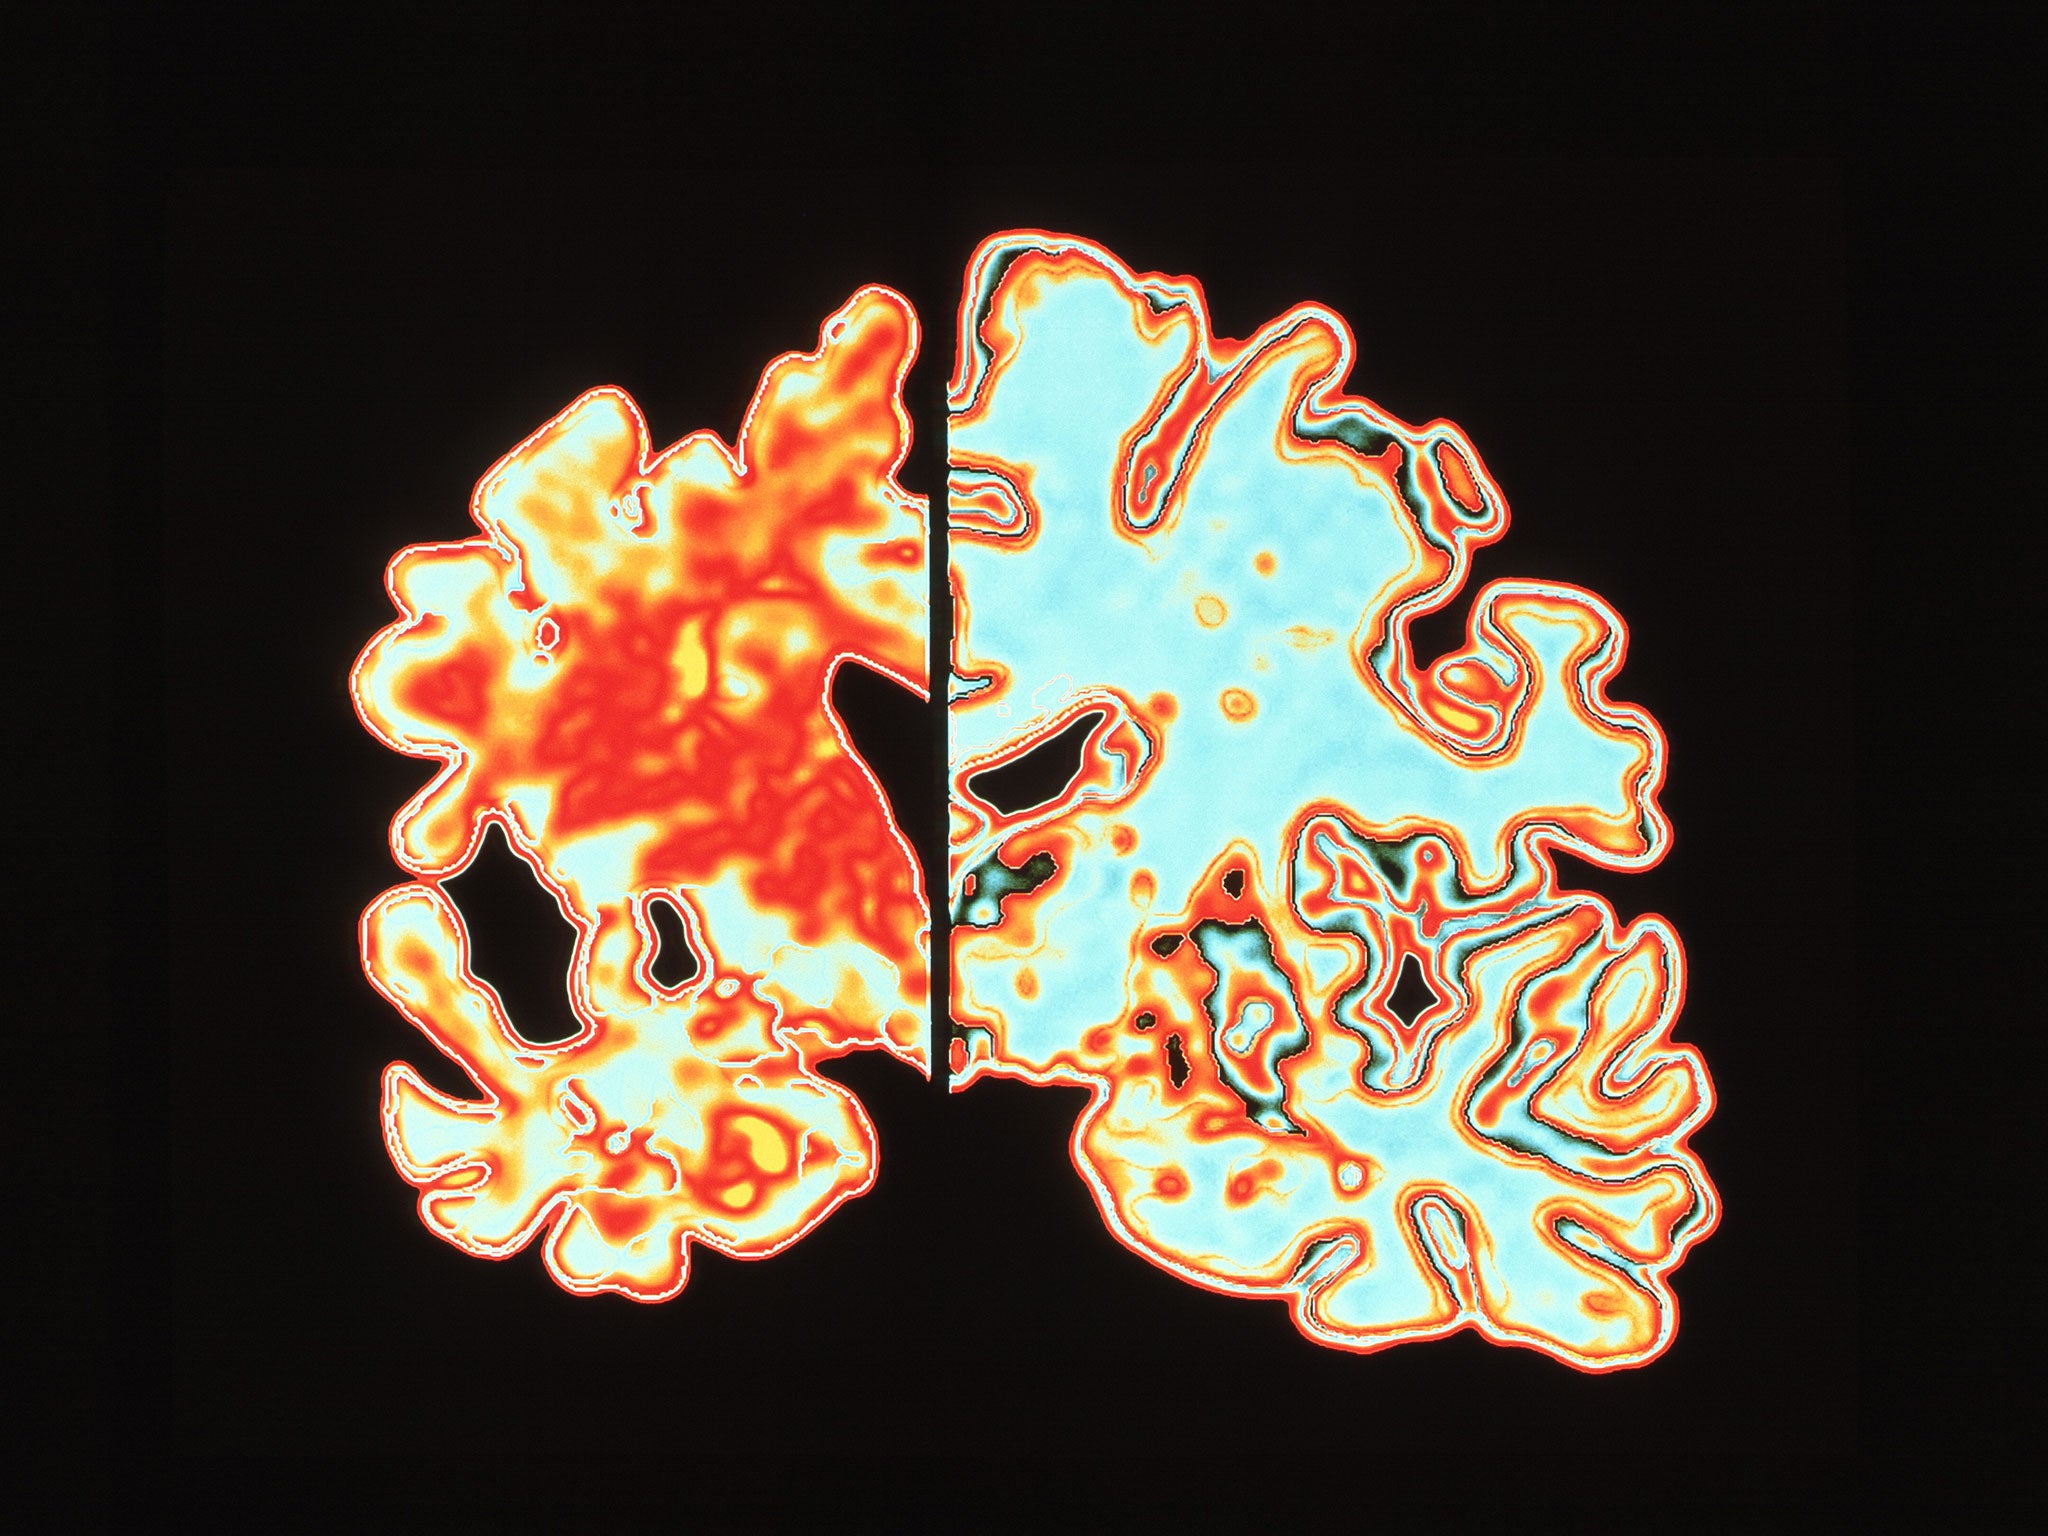 A computer graphic of a vertical (coronal) slice through the brain of an Alzheimer patient, left, compared with a normal brain, right